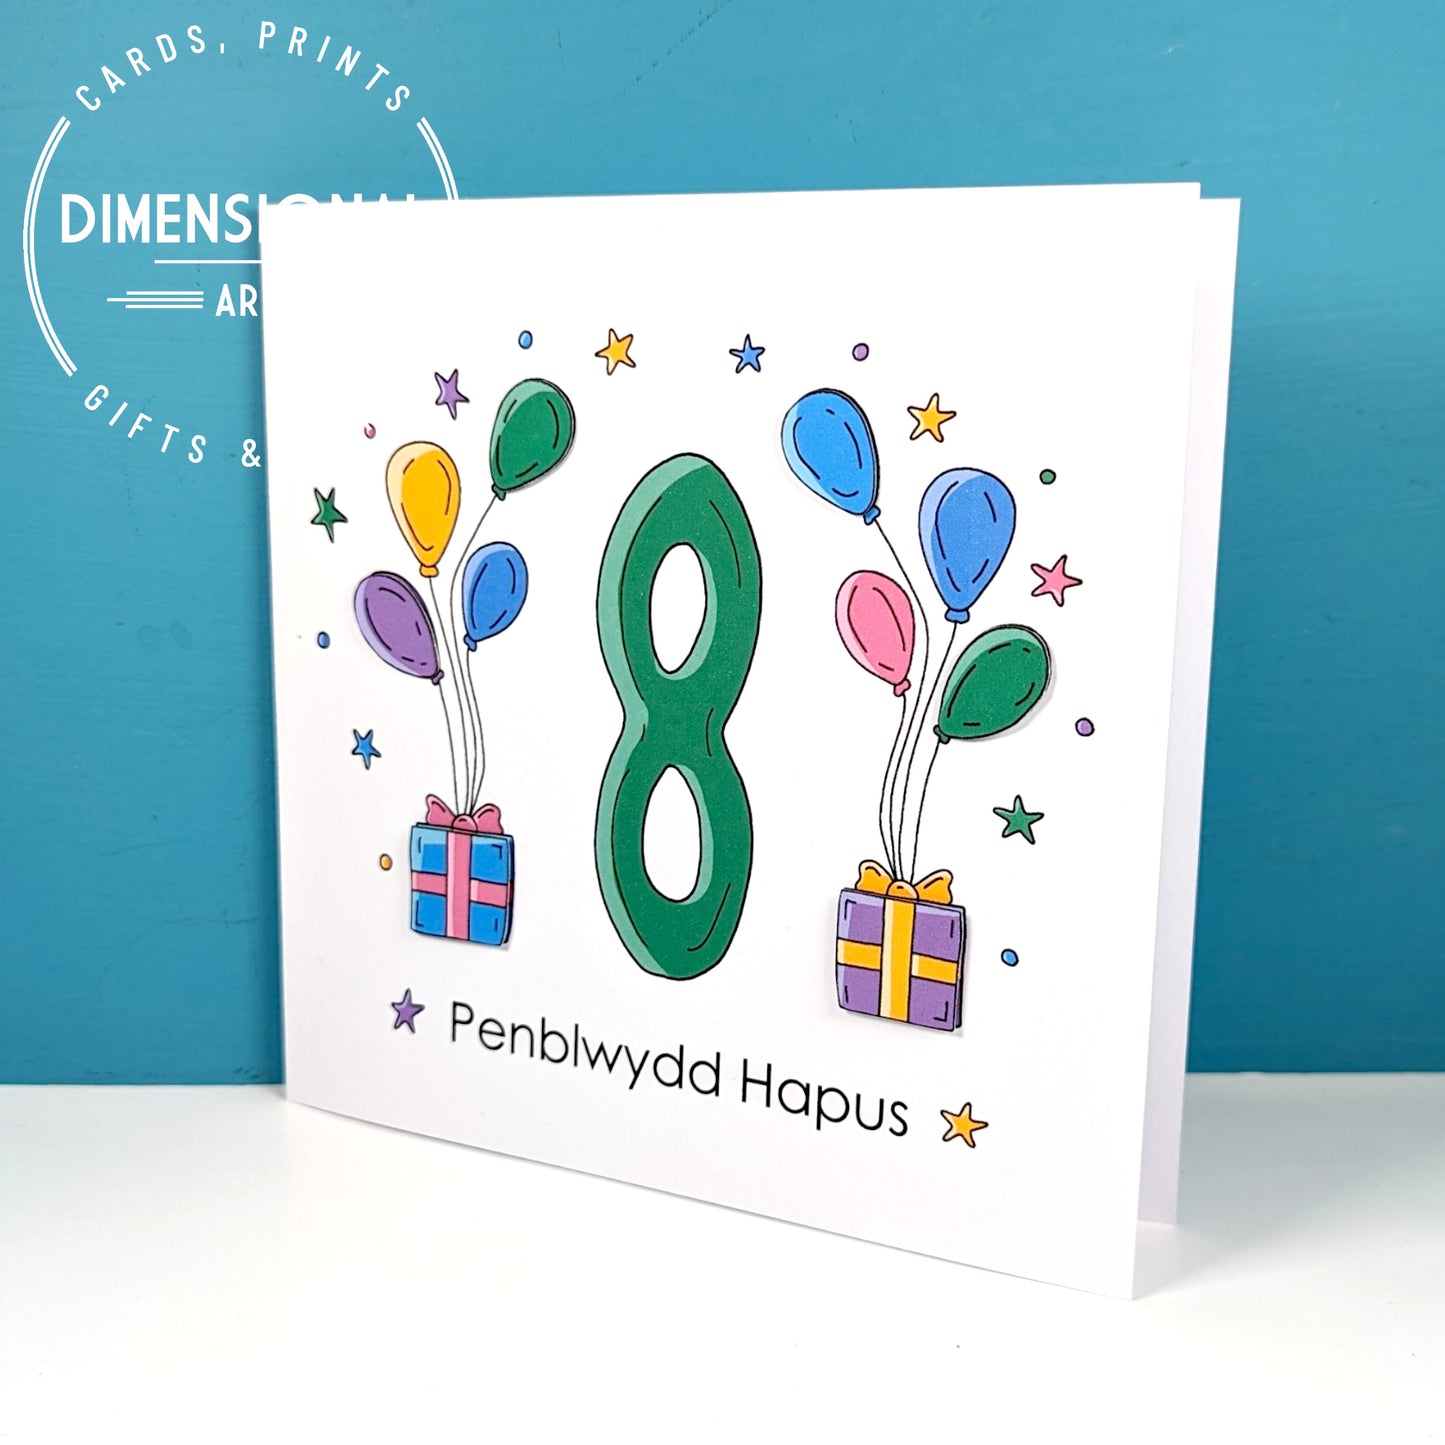 8th balloons and presents Penblwydd Hapus (Birthday) Card - Welsh